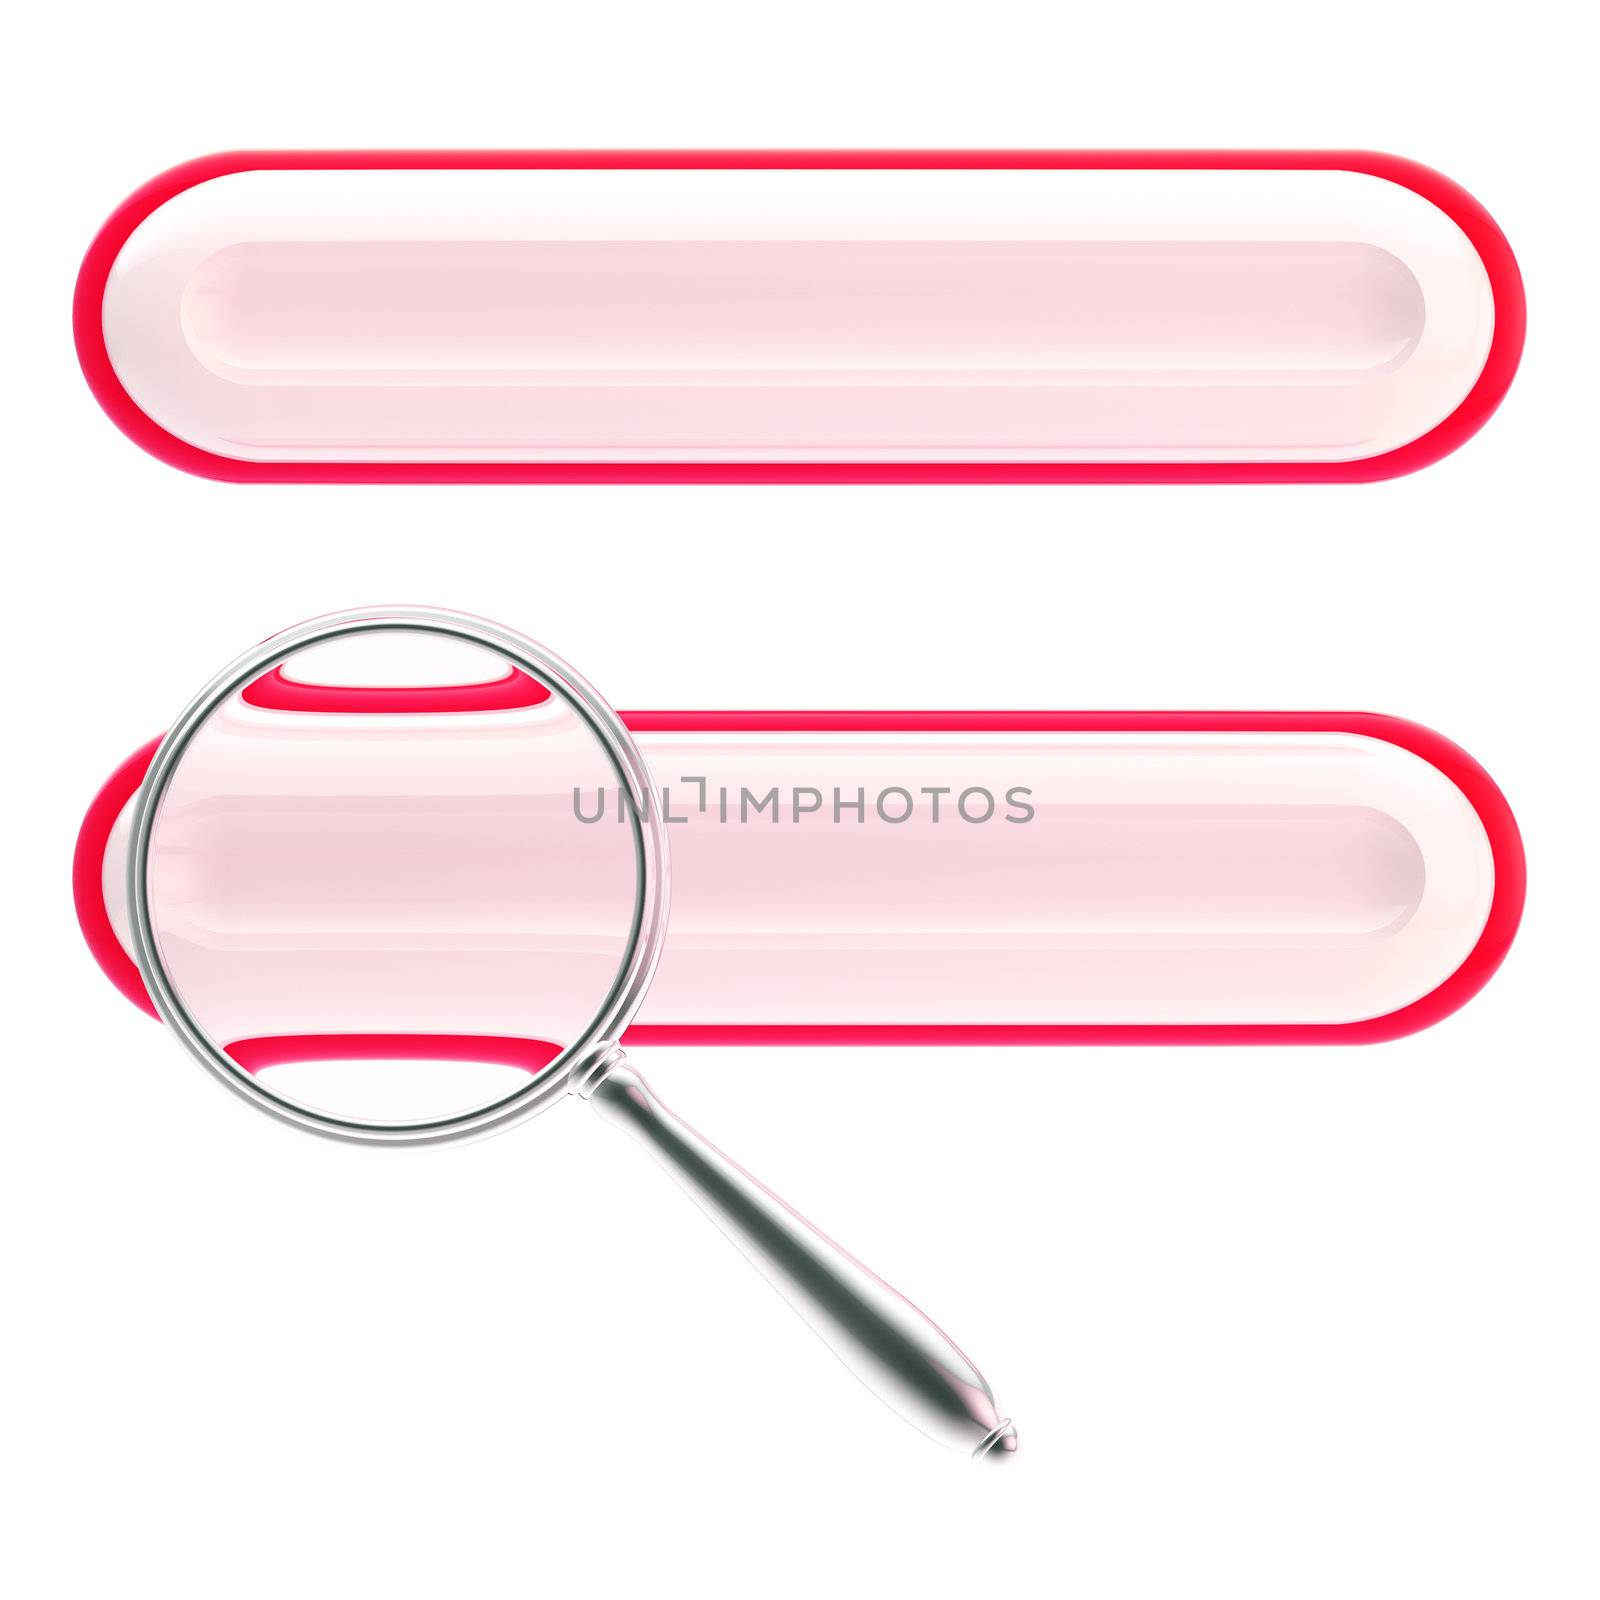 Search bar under the magnifier glossy red icon isolated on white